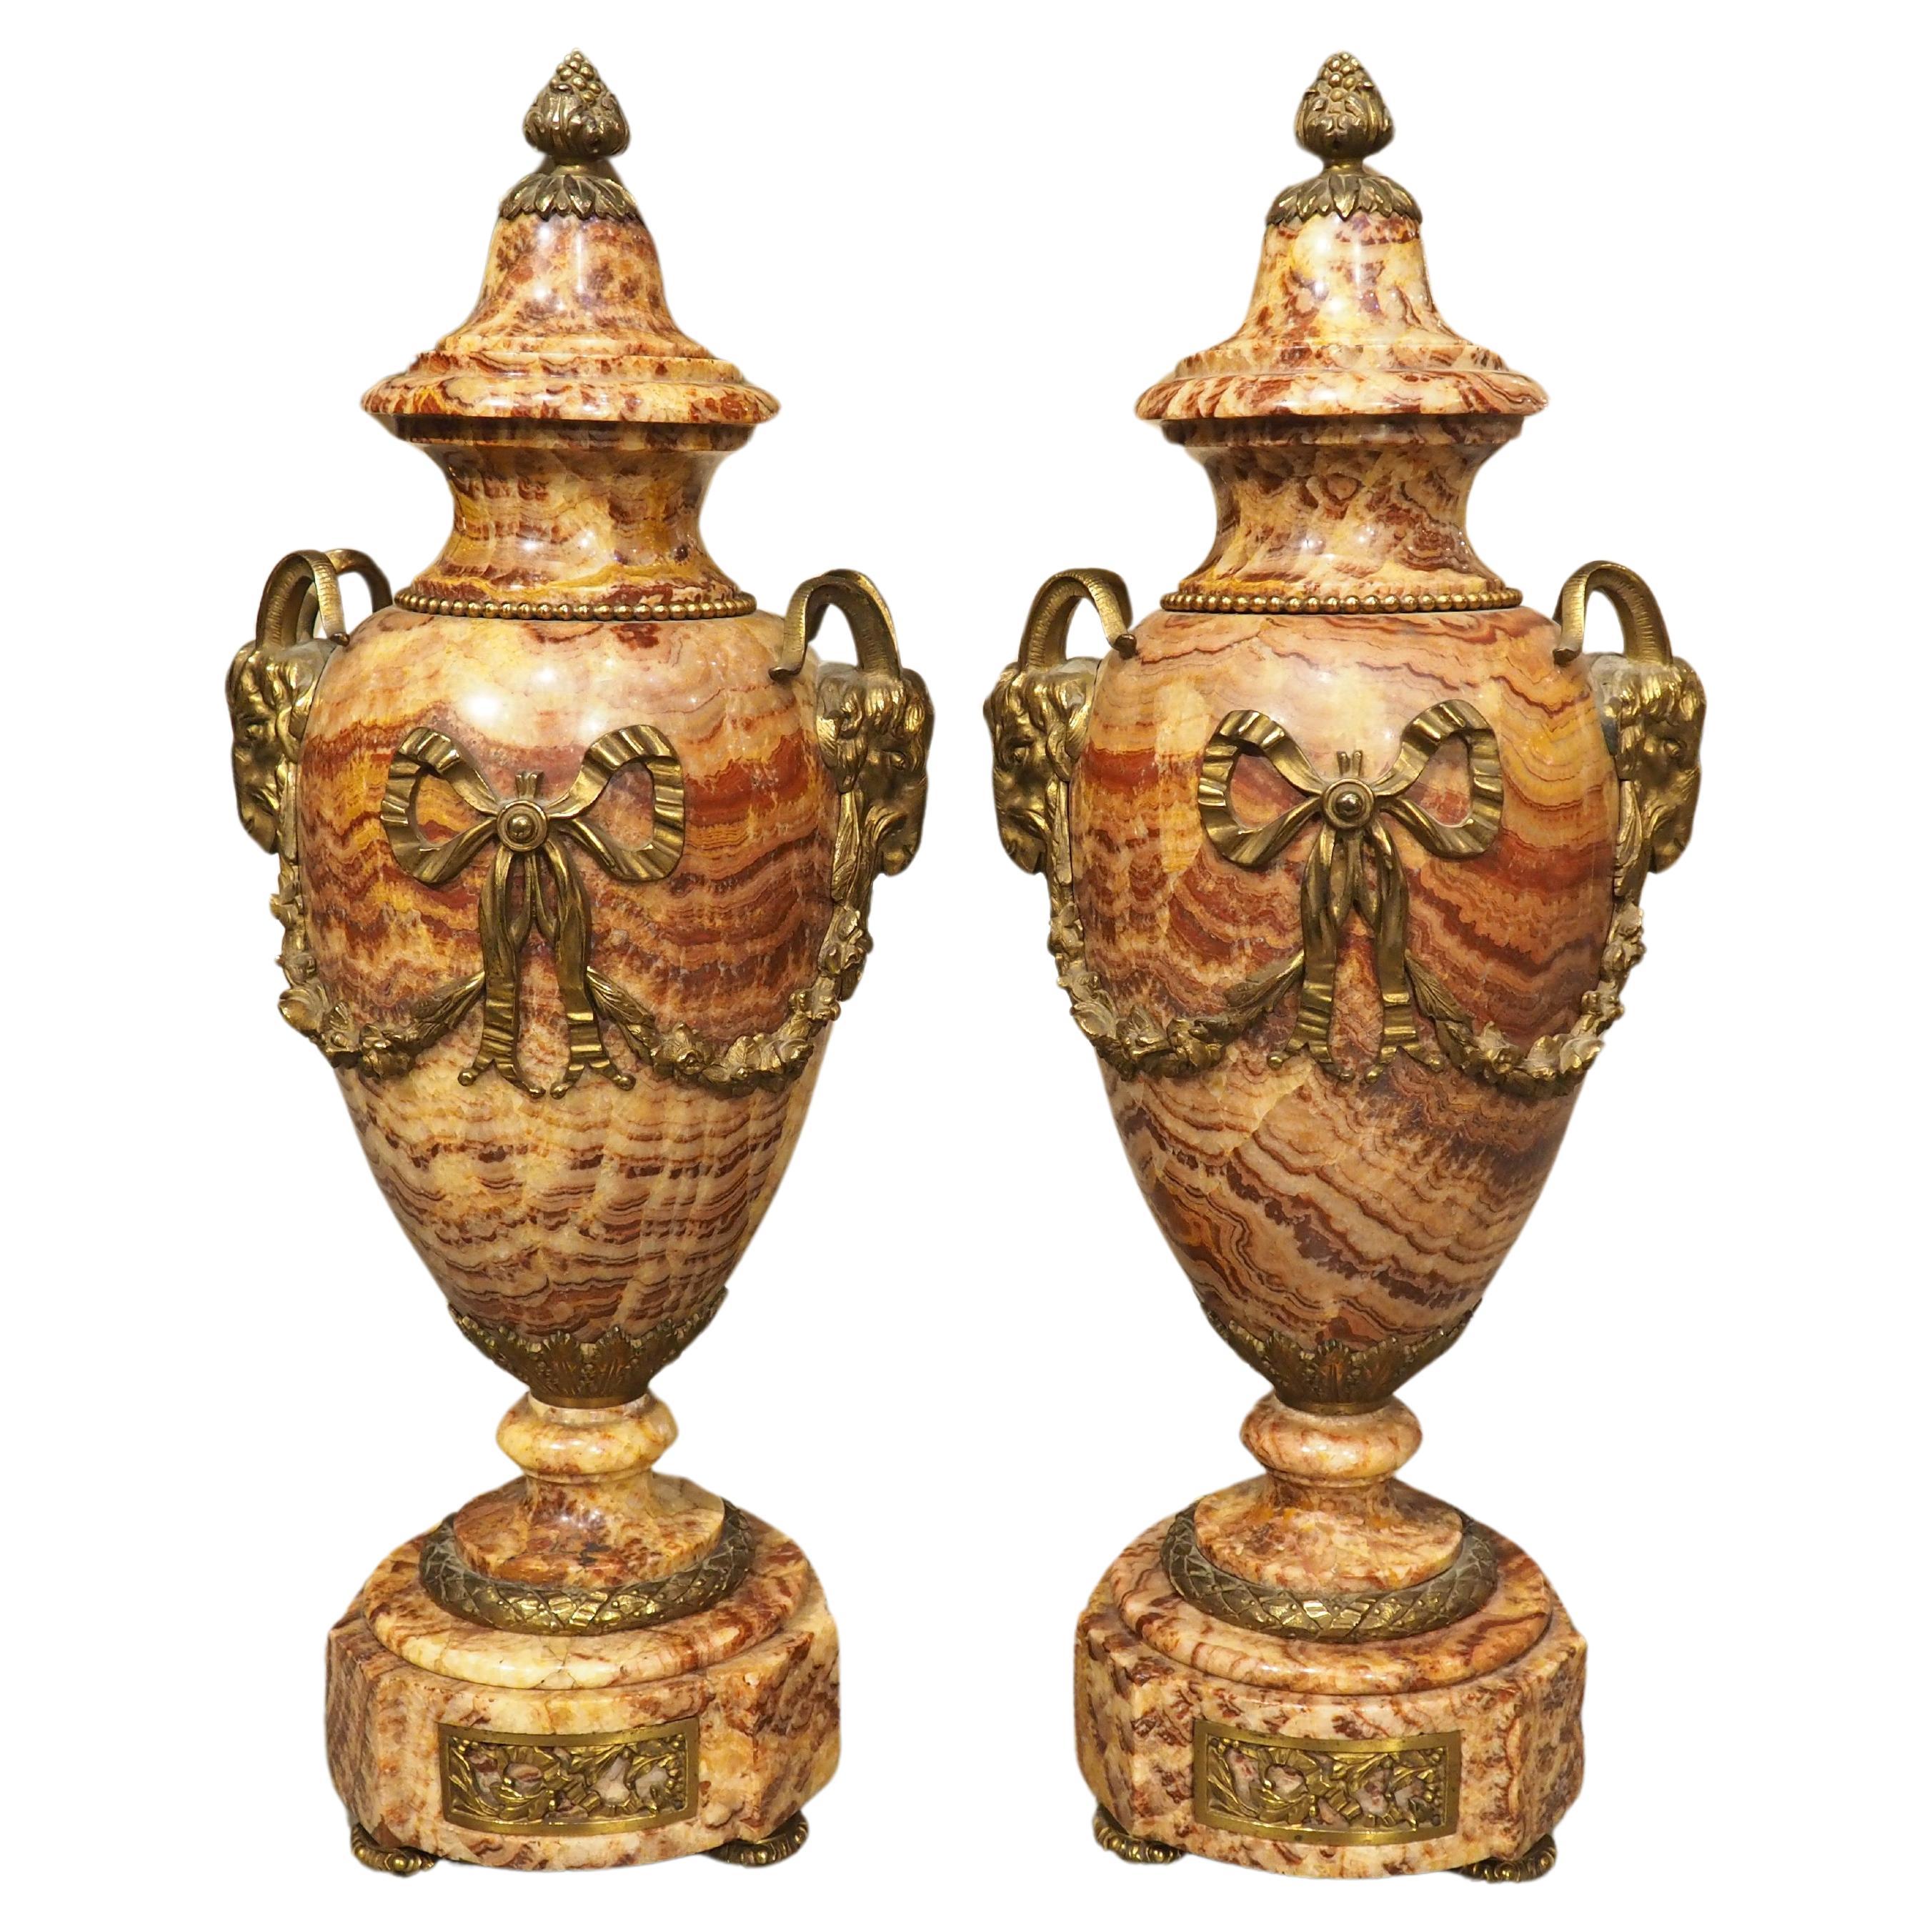 Pair of C. 1880 French Louis XVI Style Carved Marble and Gilt Bronze Cassolettes